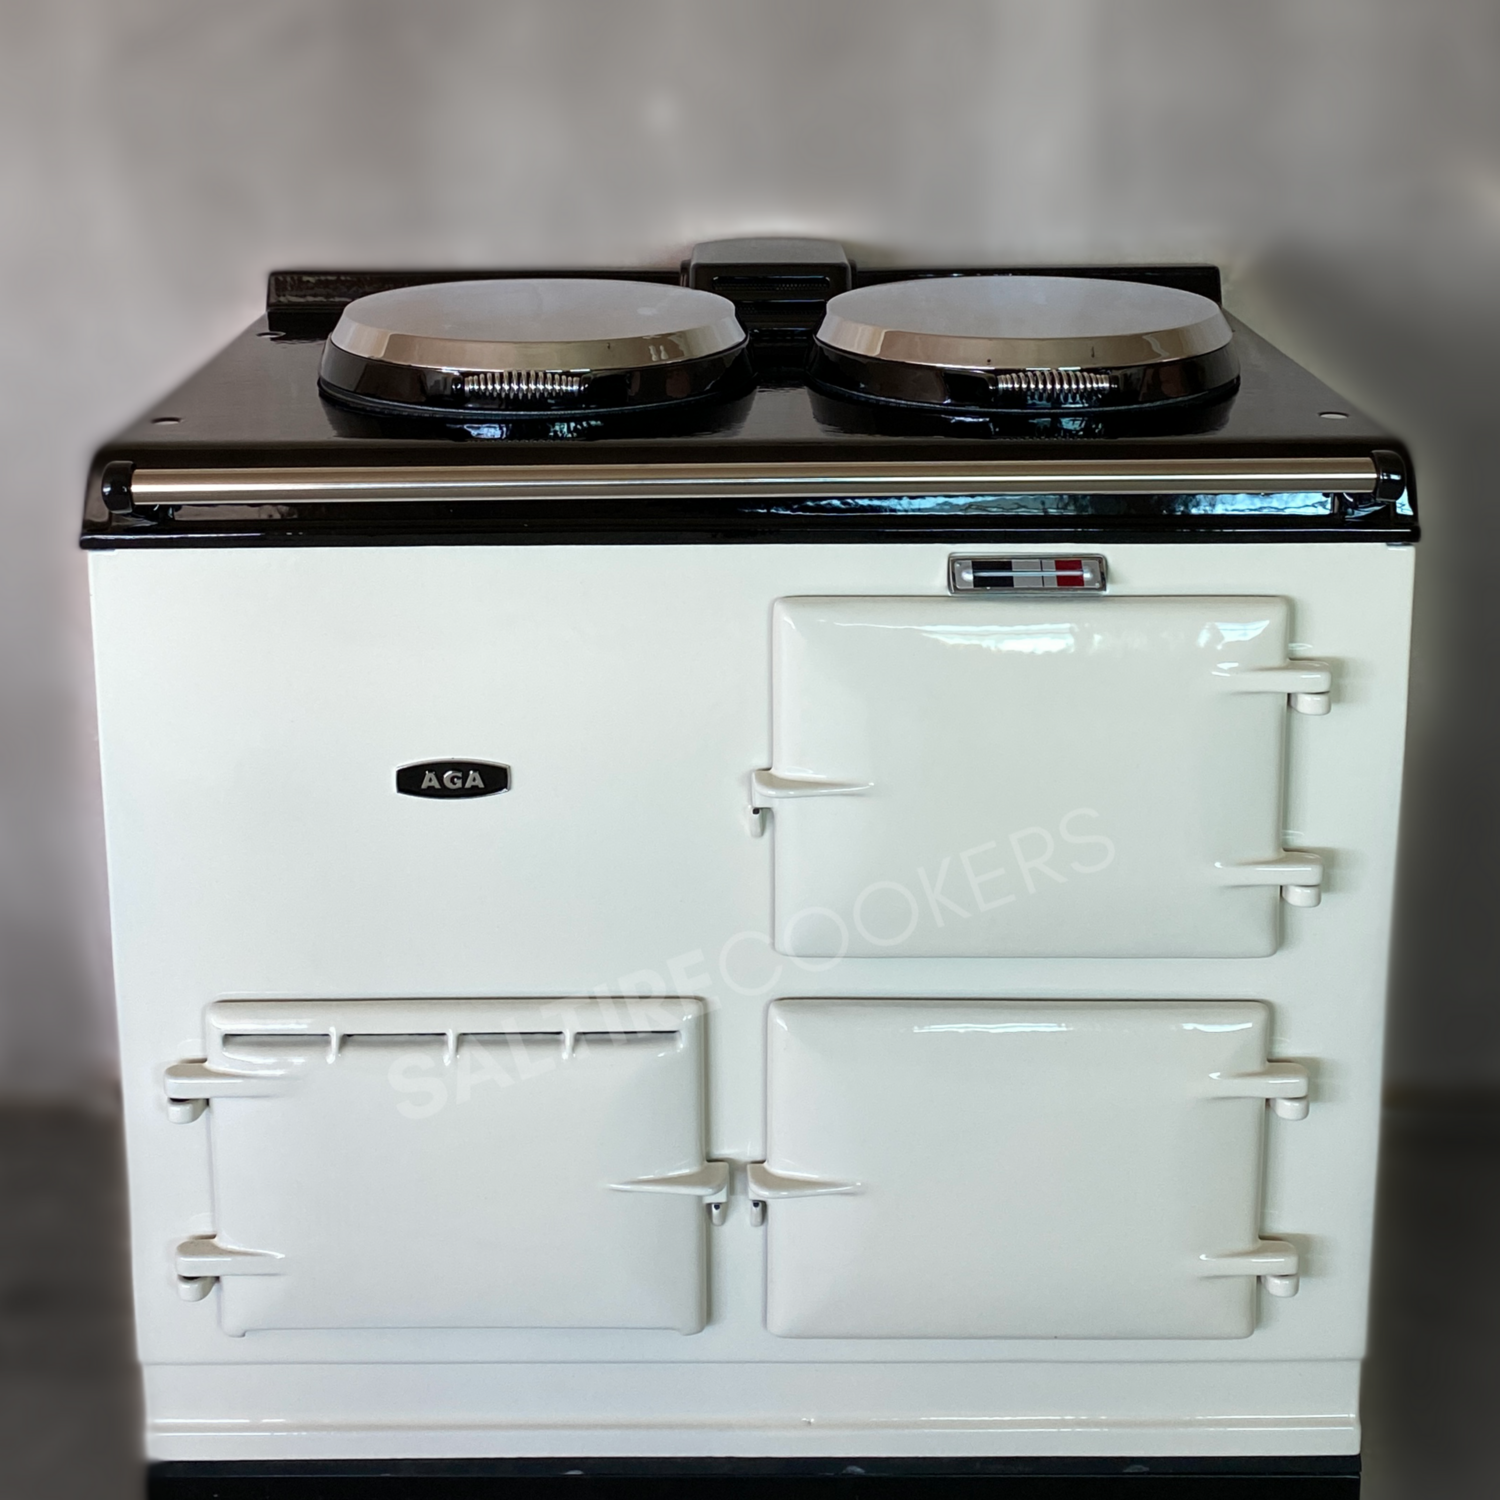 Reconditioned 2 Oven 13amp Aga Cooker (White Tie)